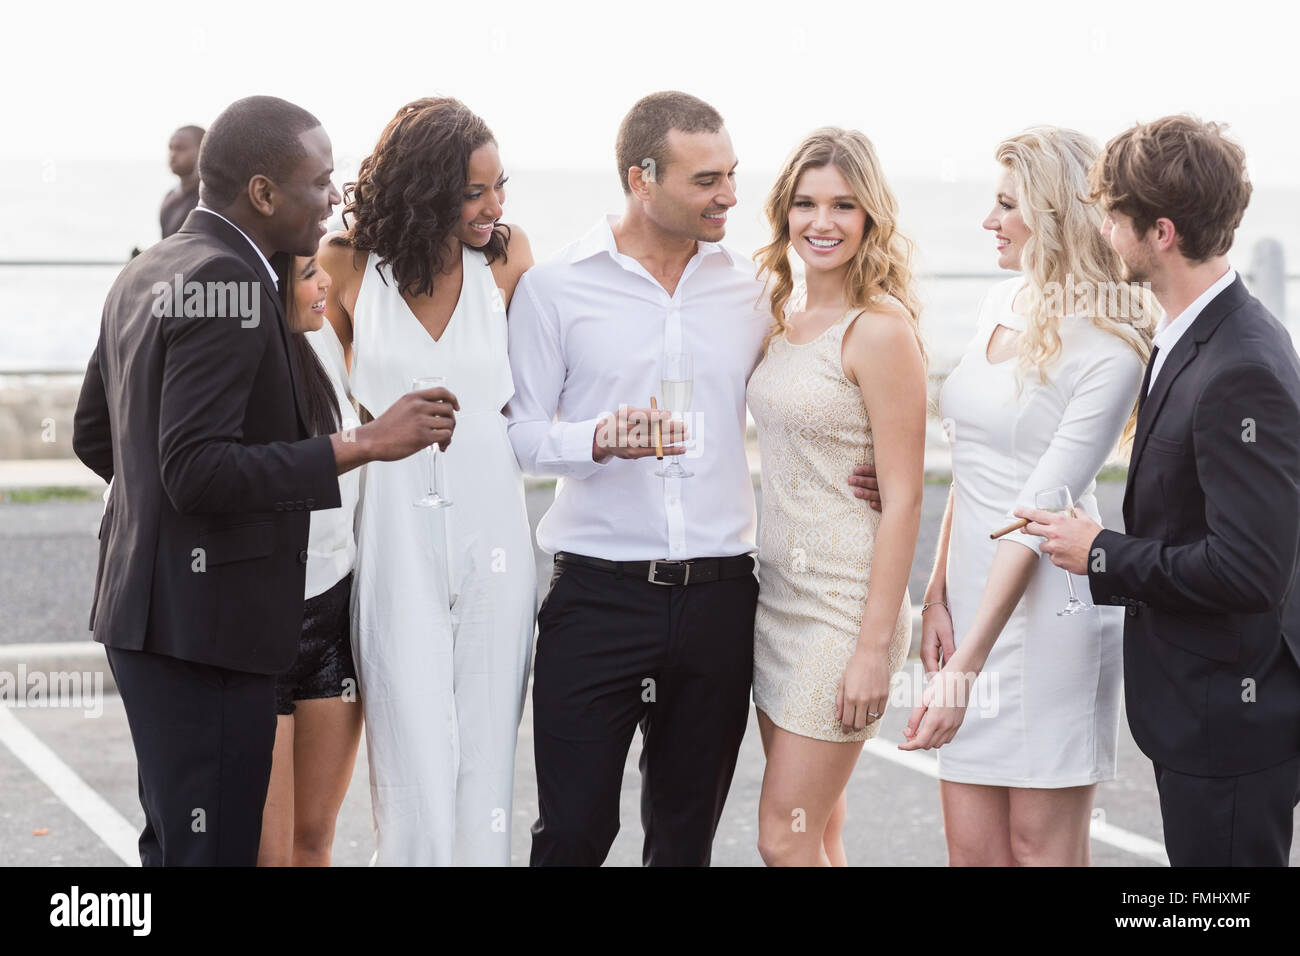 Well dressed people posing next to a limousine Stock Photo